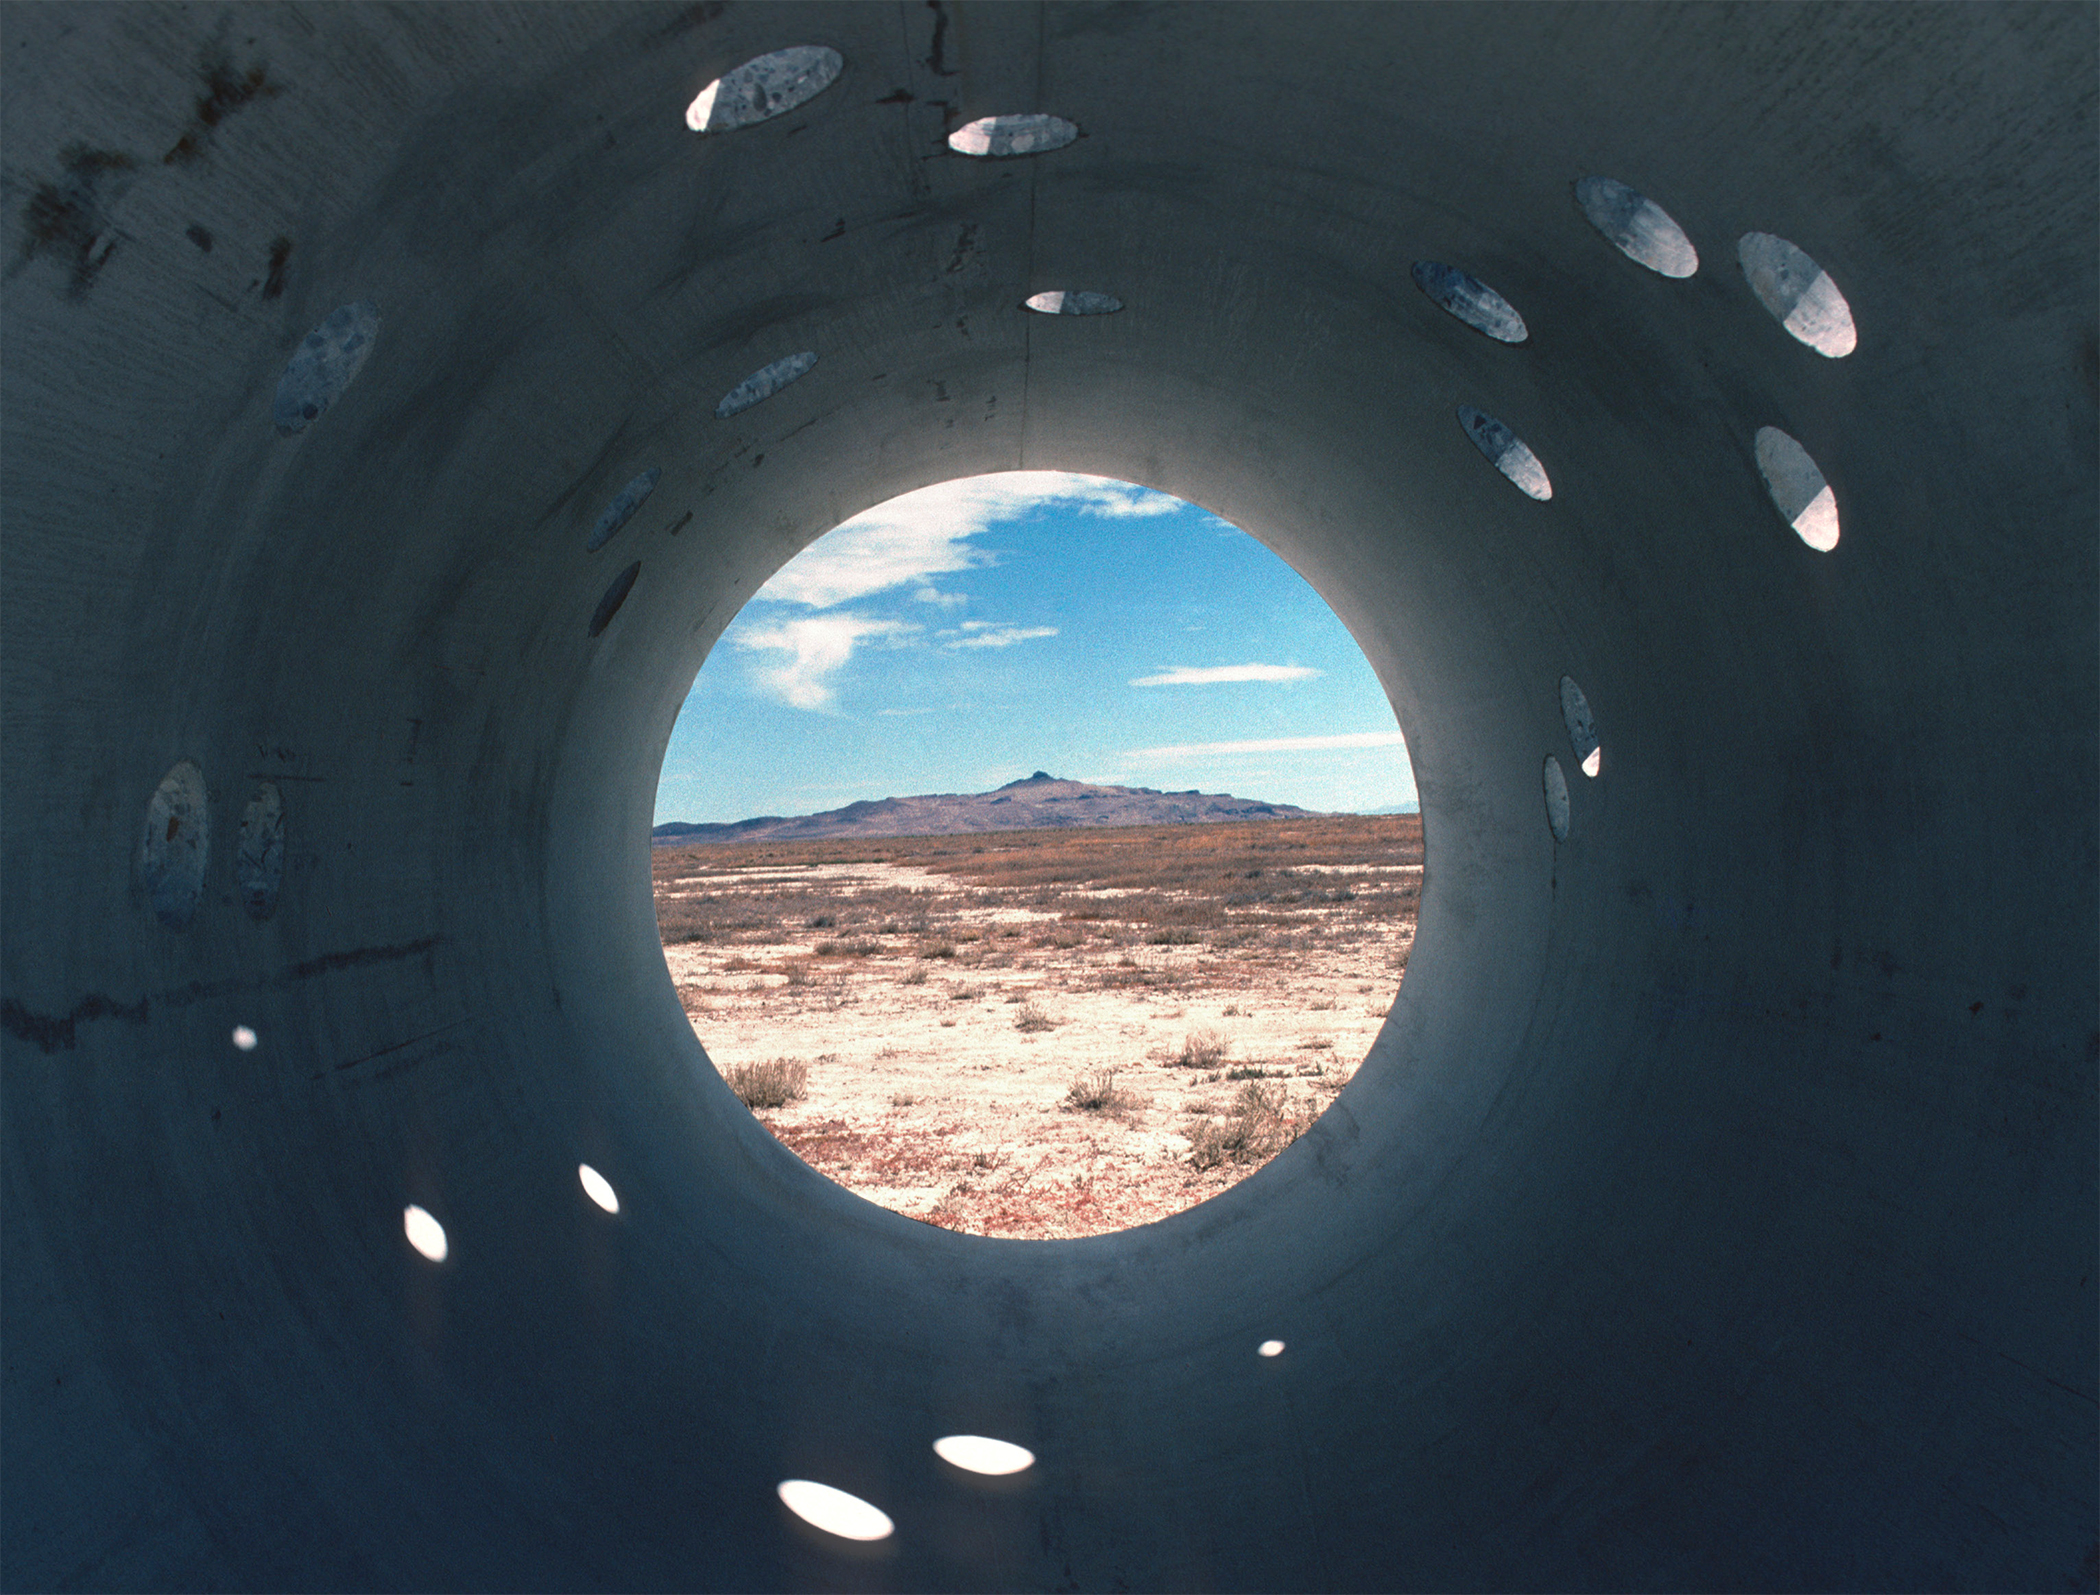 Sun Tunnels (1973) by Nancy Holt. As reproduced in Art & Place: Site-specific Art of the Americas